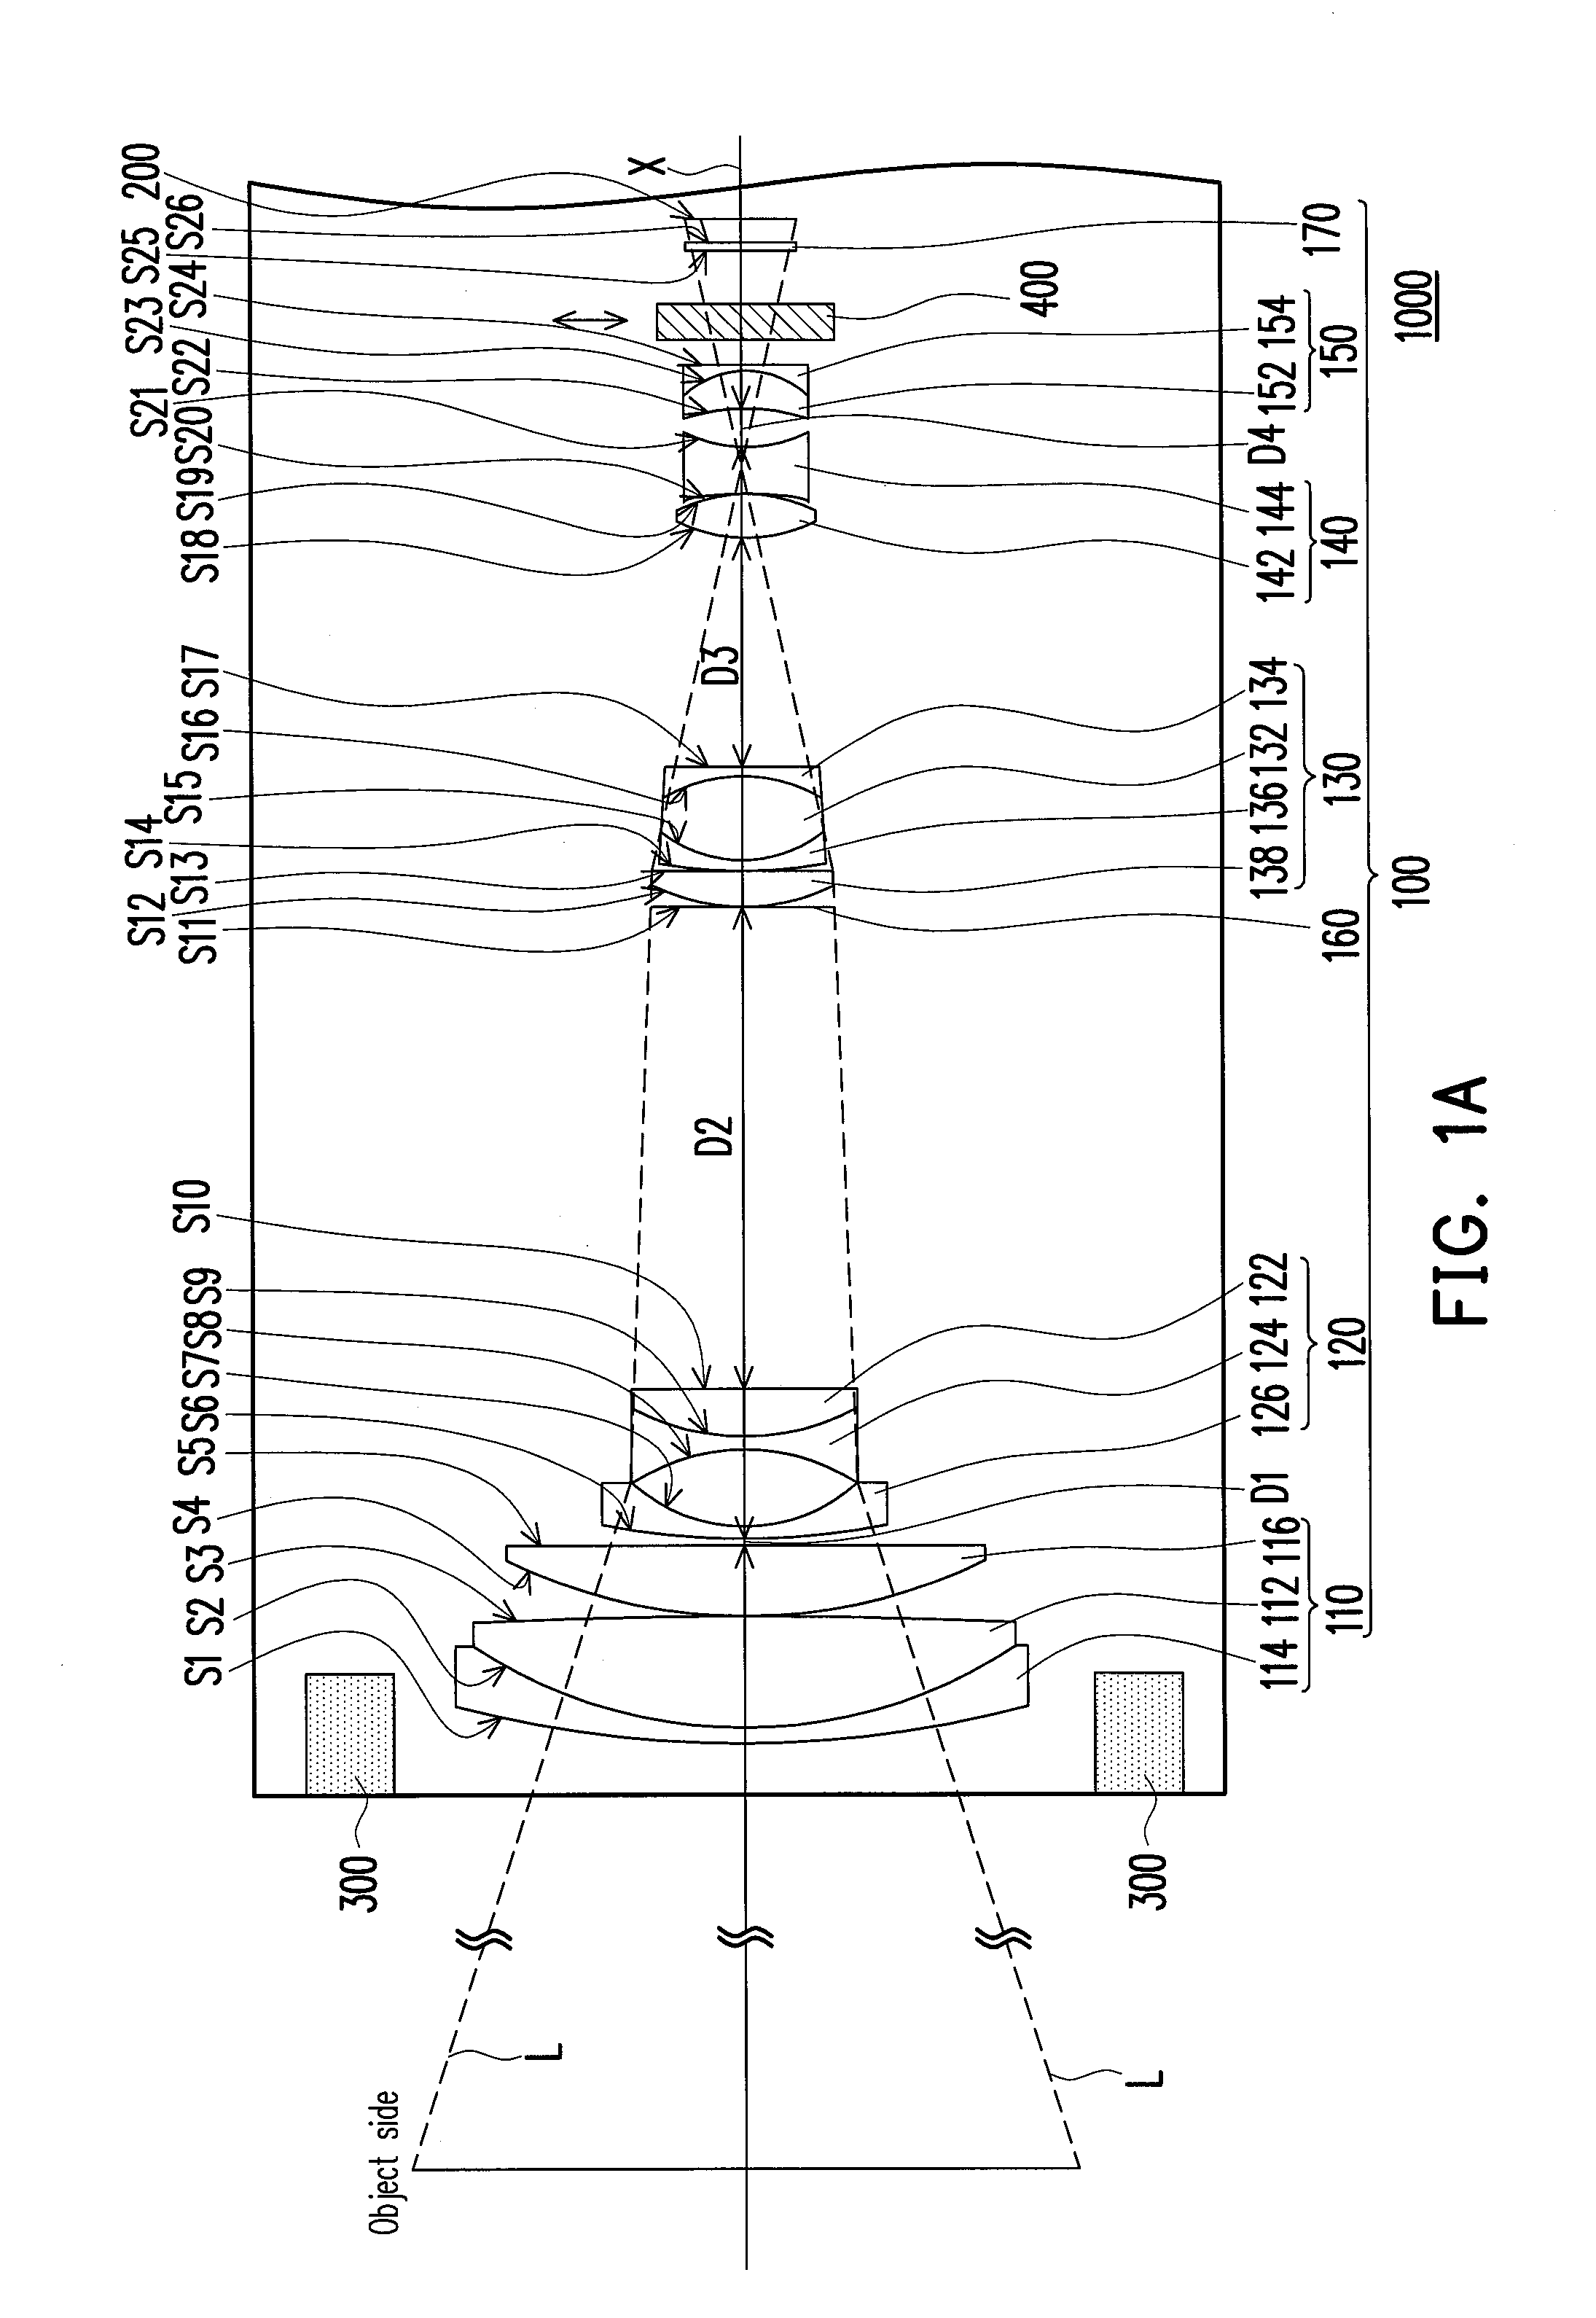 Lens module and image apparatus